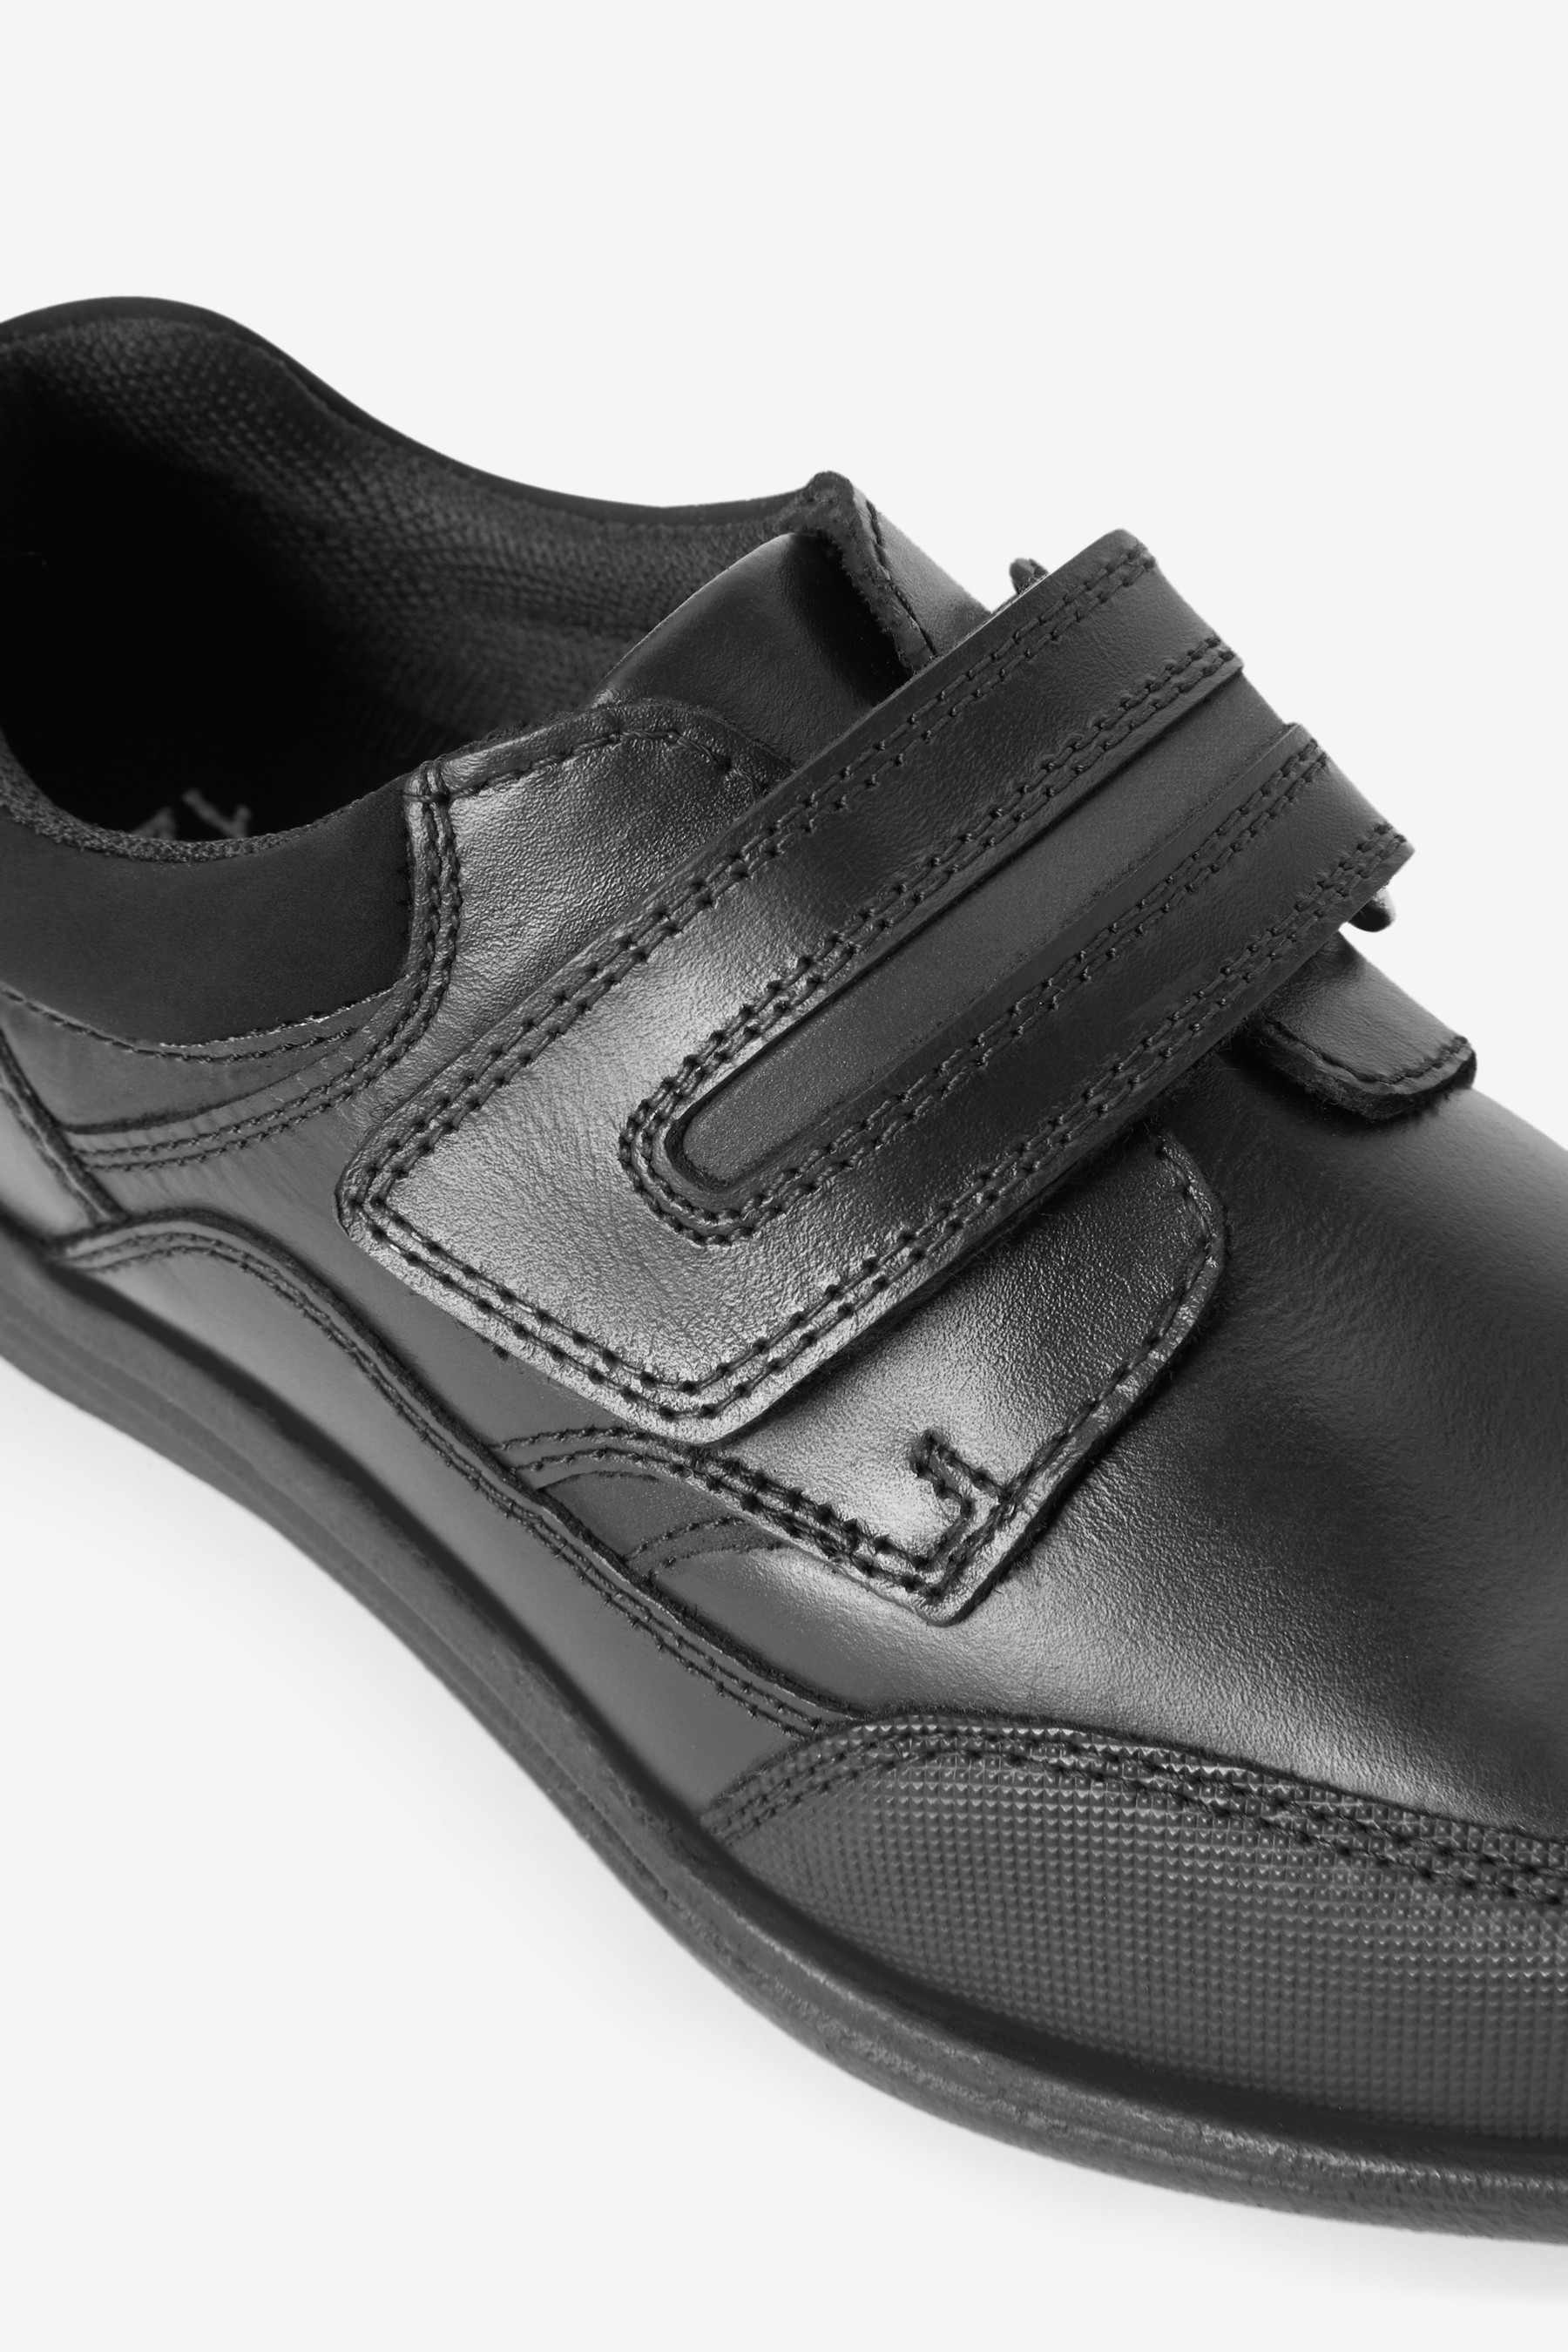 School Leather Single Strap Shoes Wide Fit (G)